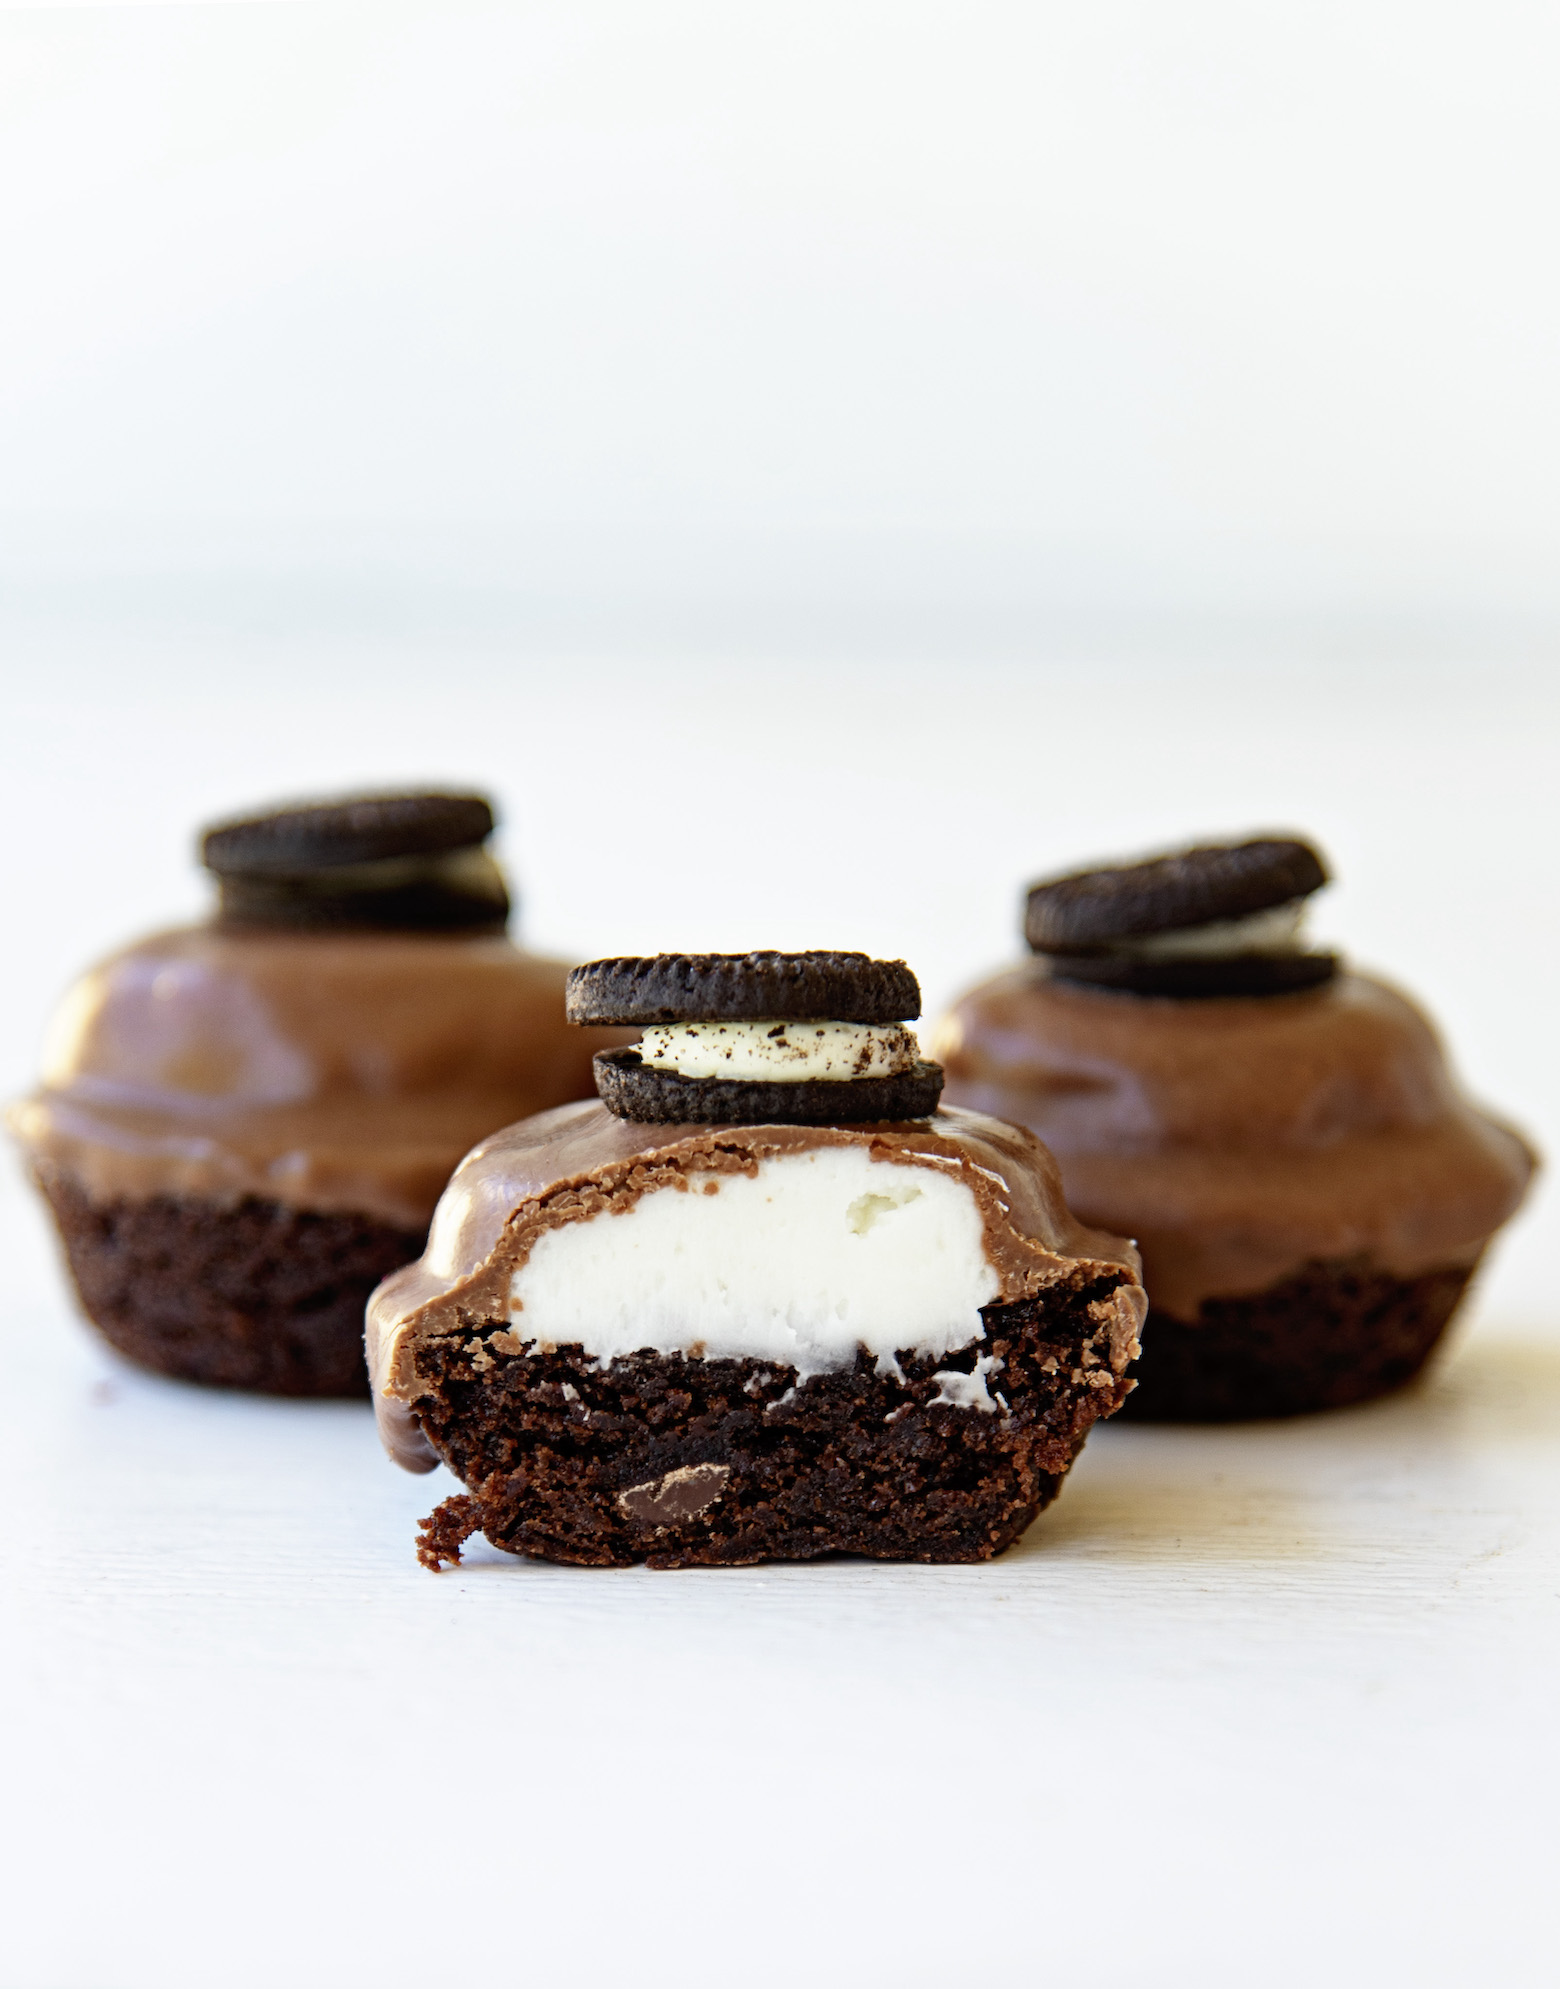 Three brownie bites with two in the back and one front and center. The one in the center is cut in half with the cream filling exposed. 